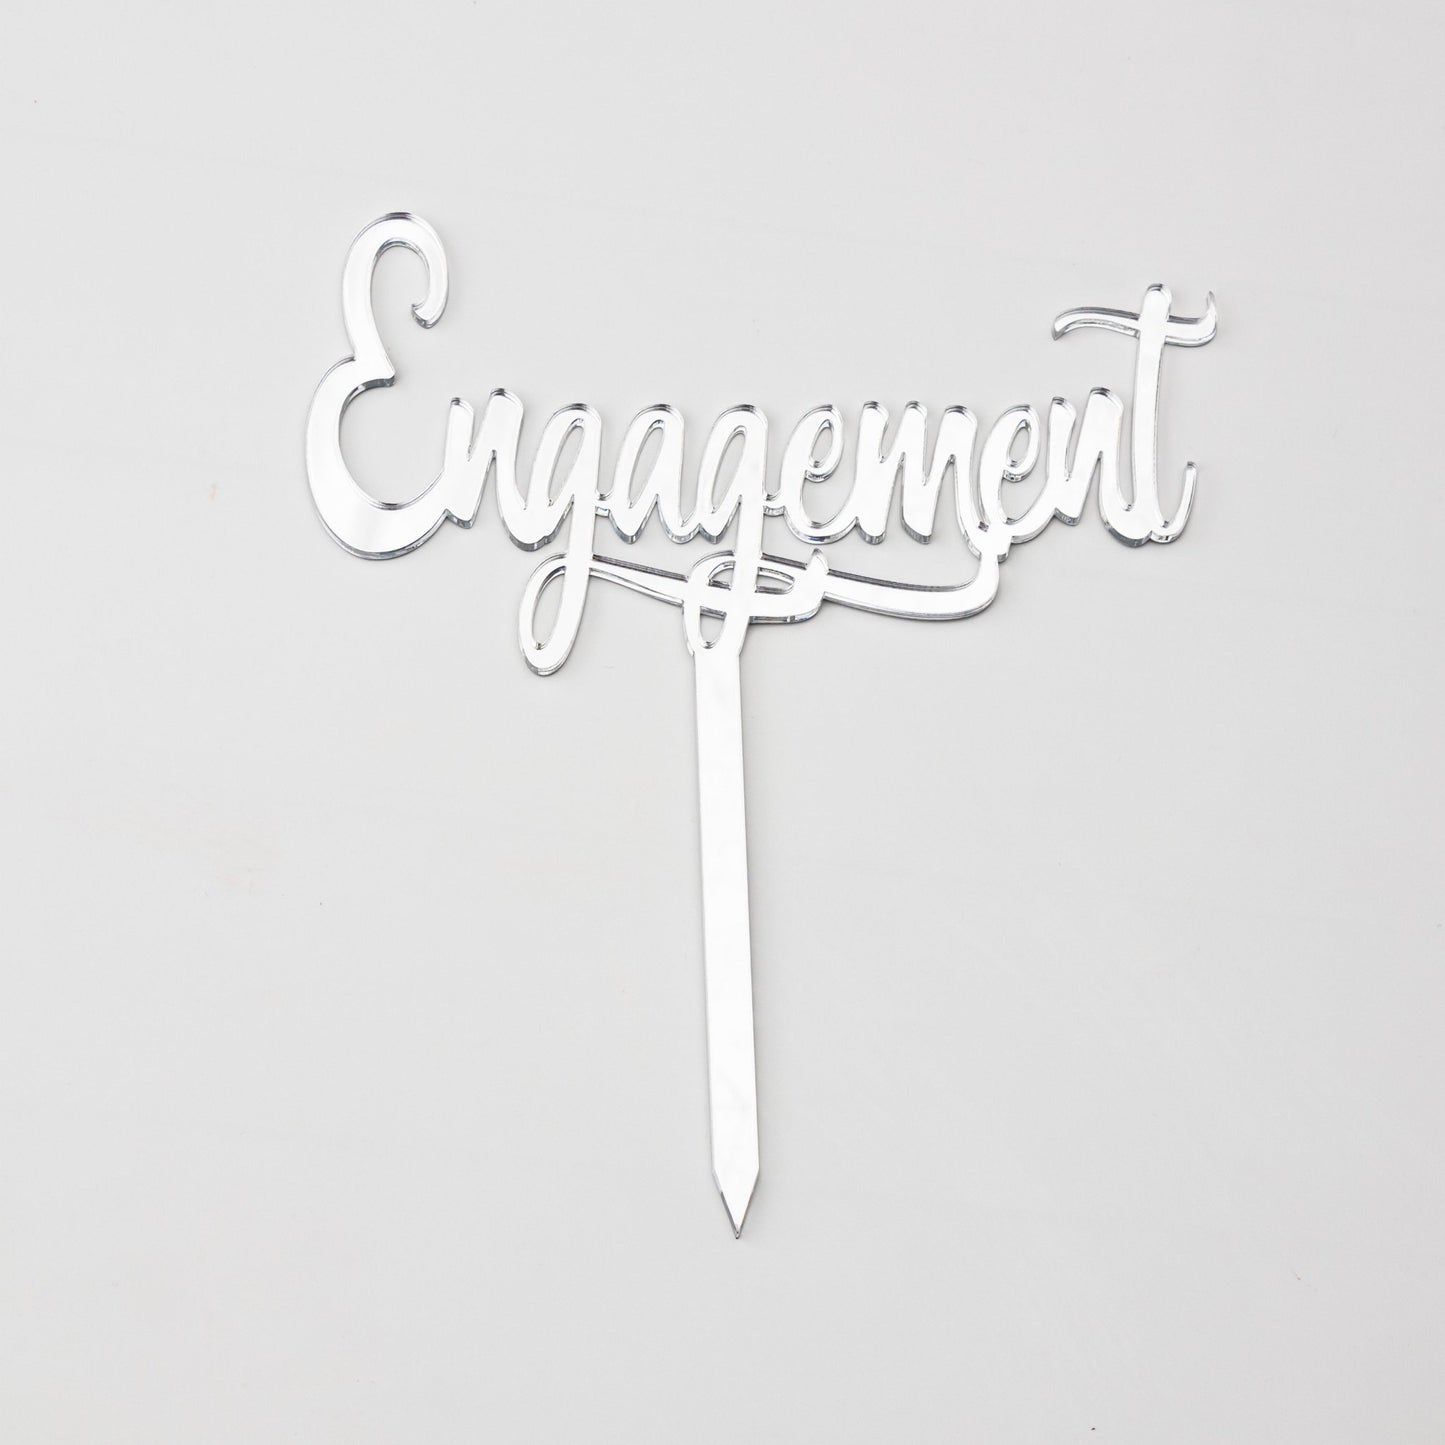 Engagement Cake Topper - bannos